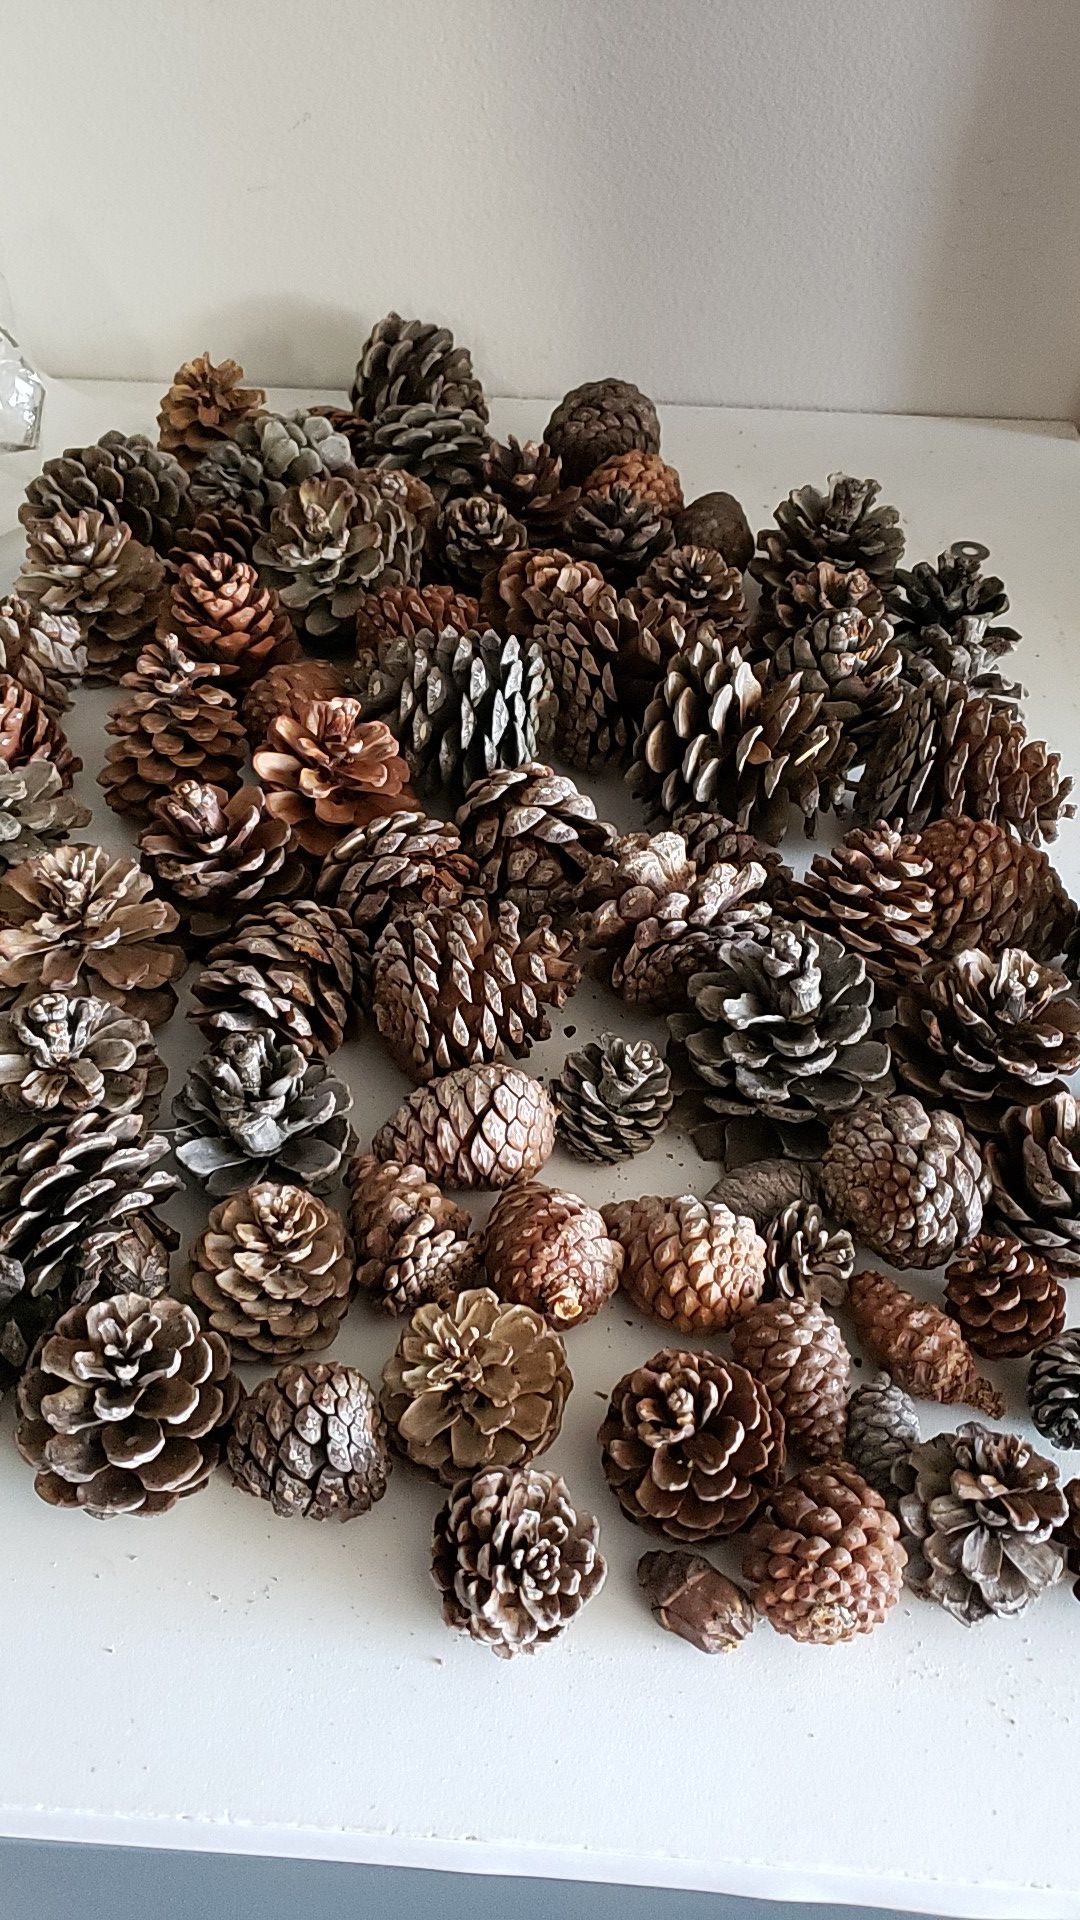 Various pine cones for crafting